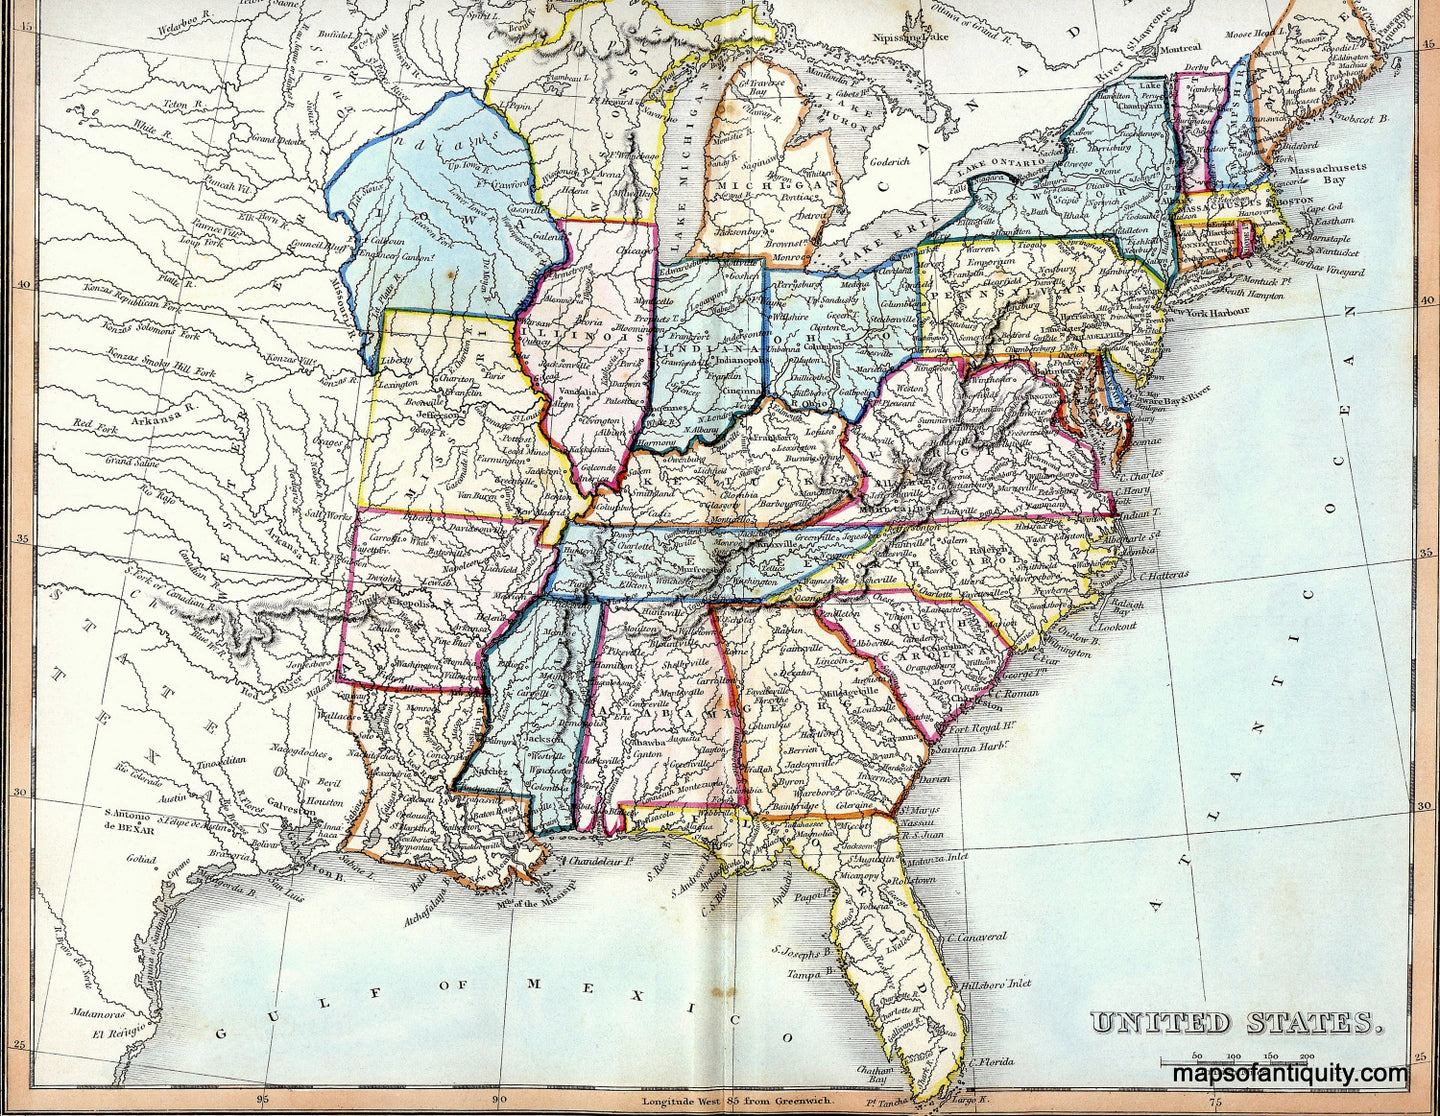 Antique-Hand-Colored-Map-United-States.-**********-United-States-Eastern-United-States-1845-Findlay-Maps-Of-Antiquity